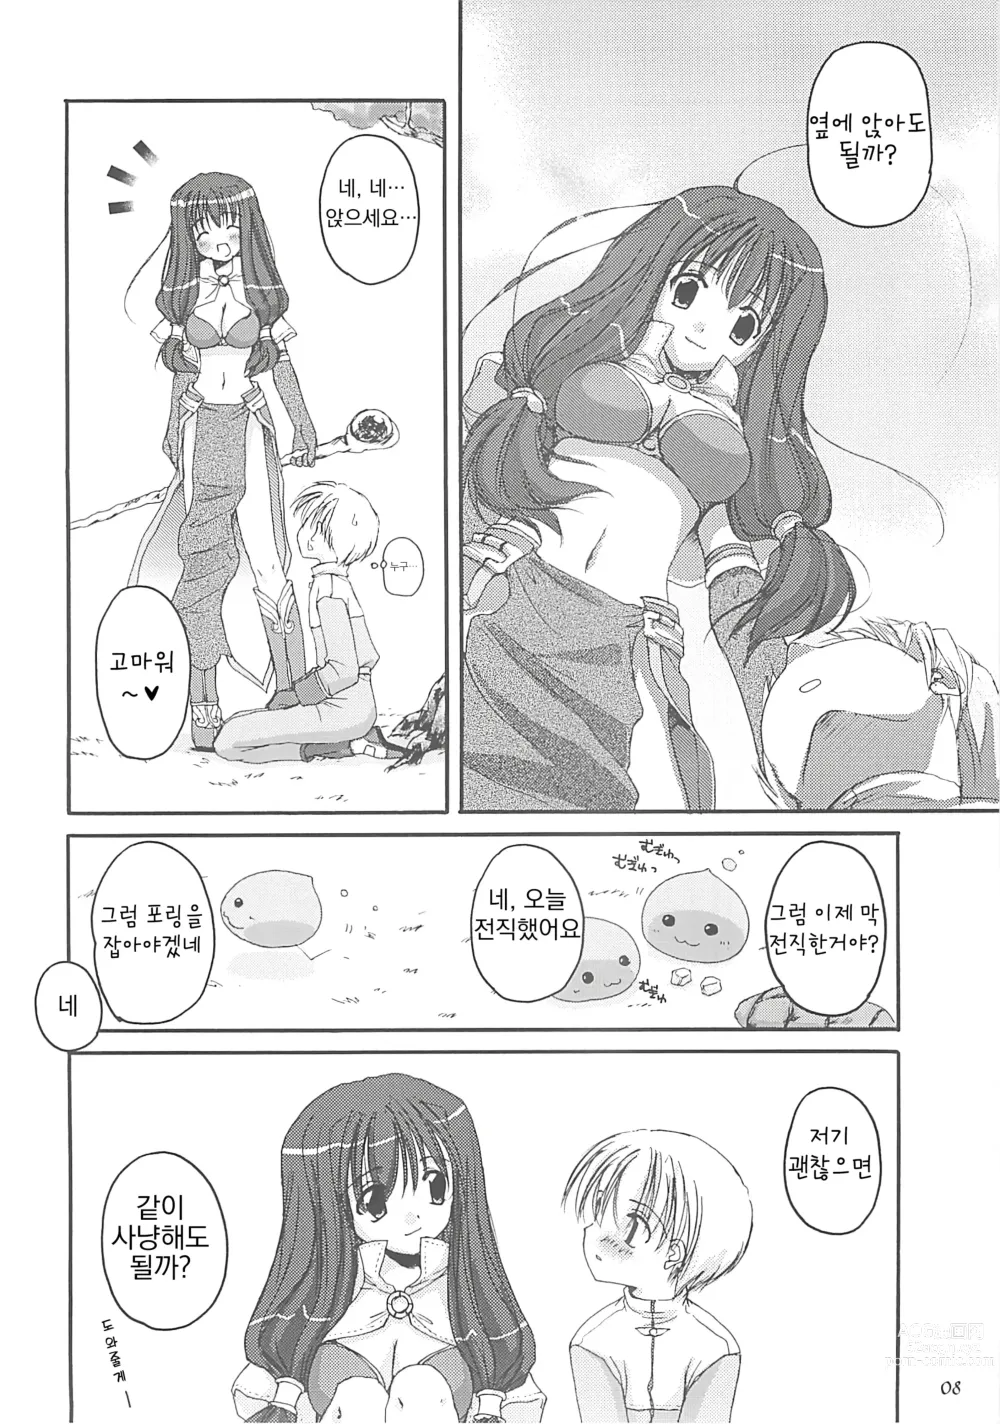 Page 7 of doujinshi D.L. Action 13